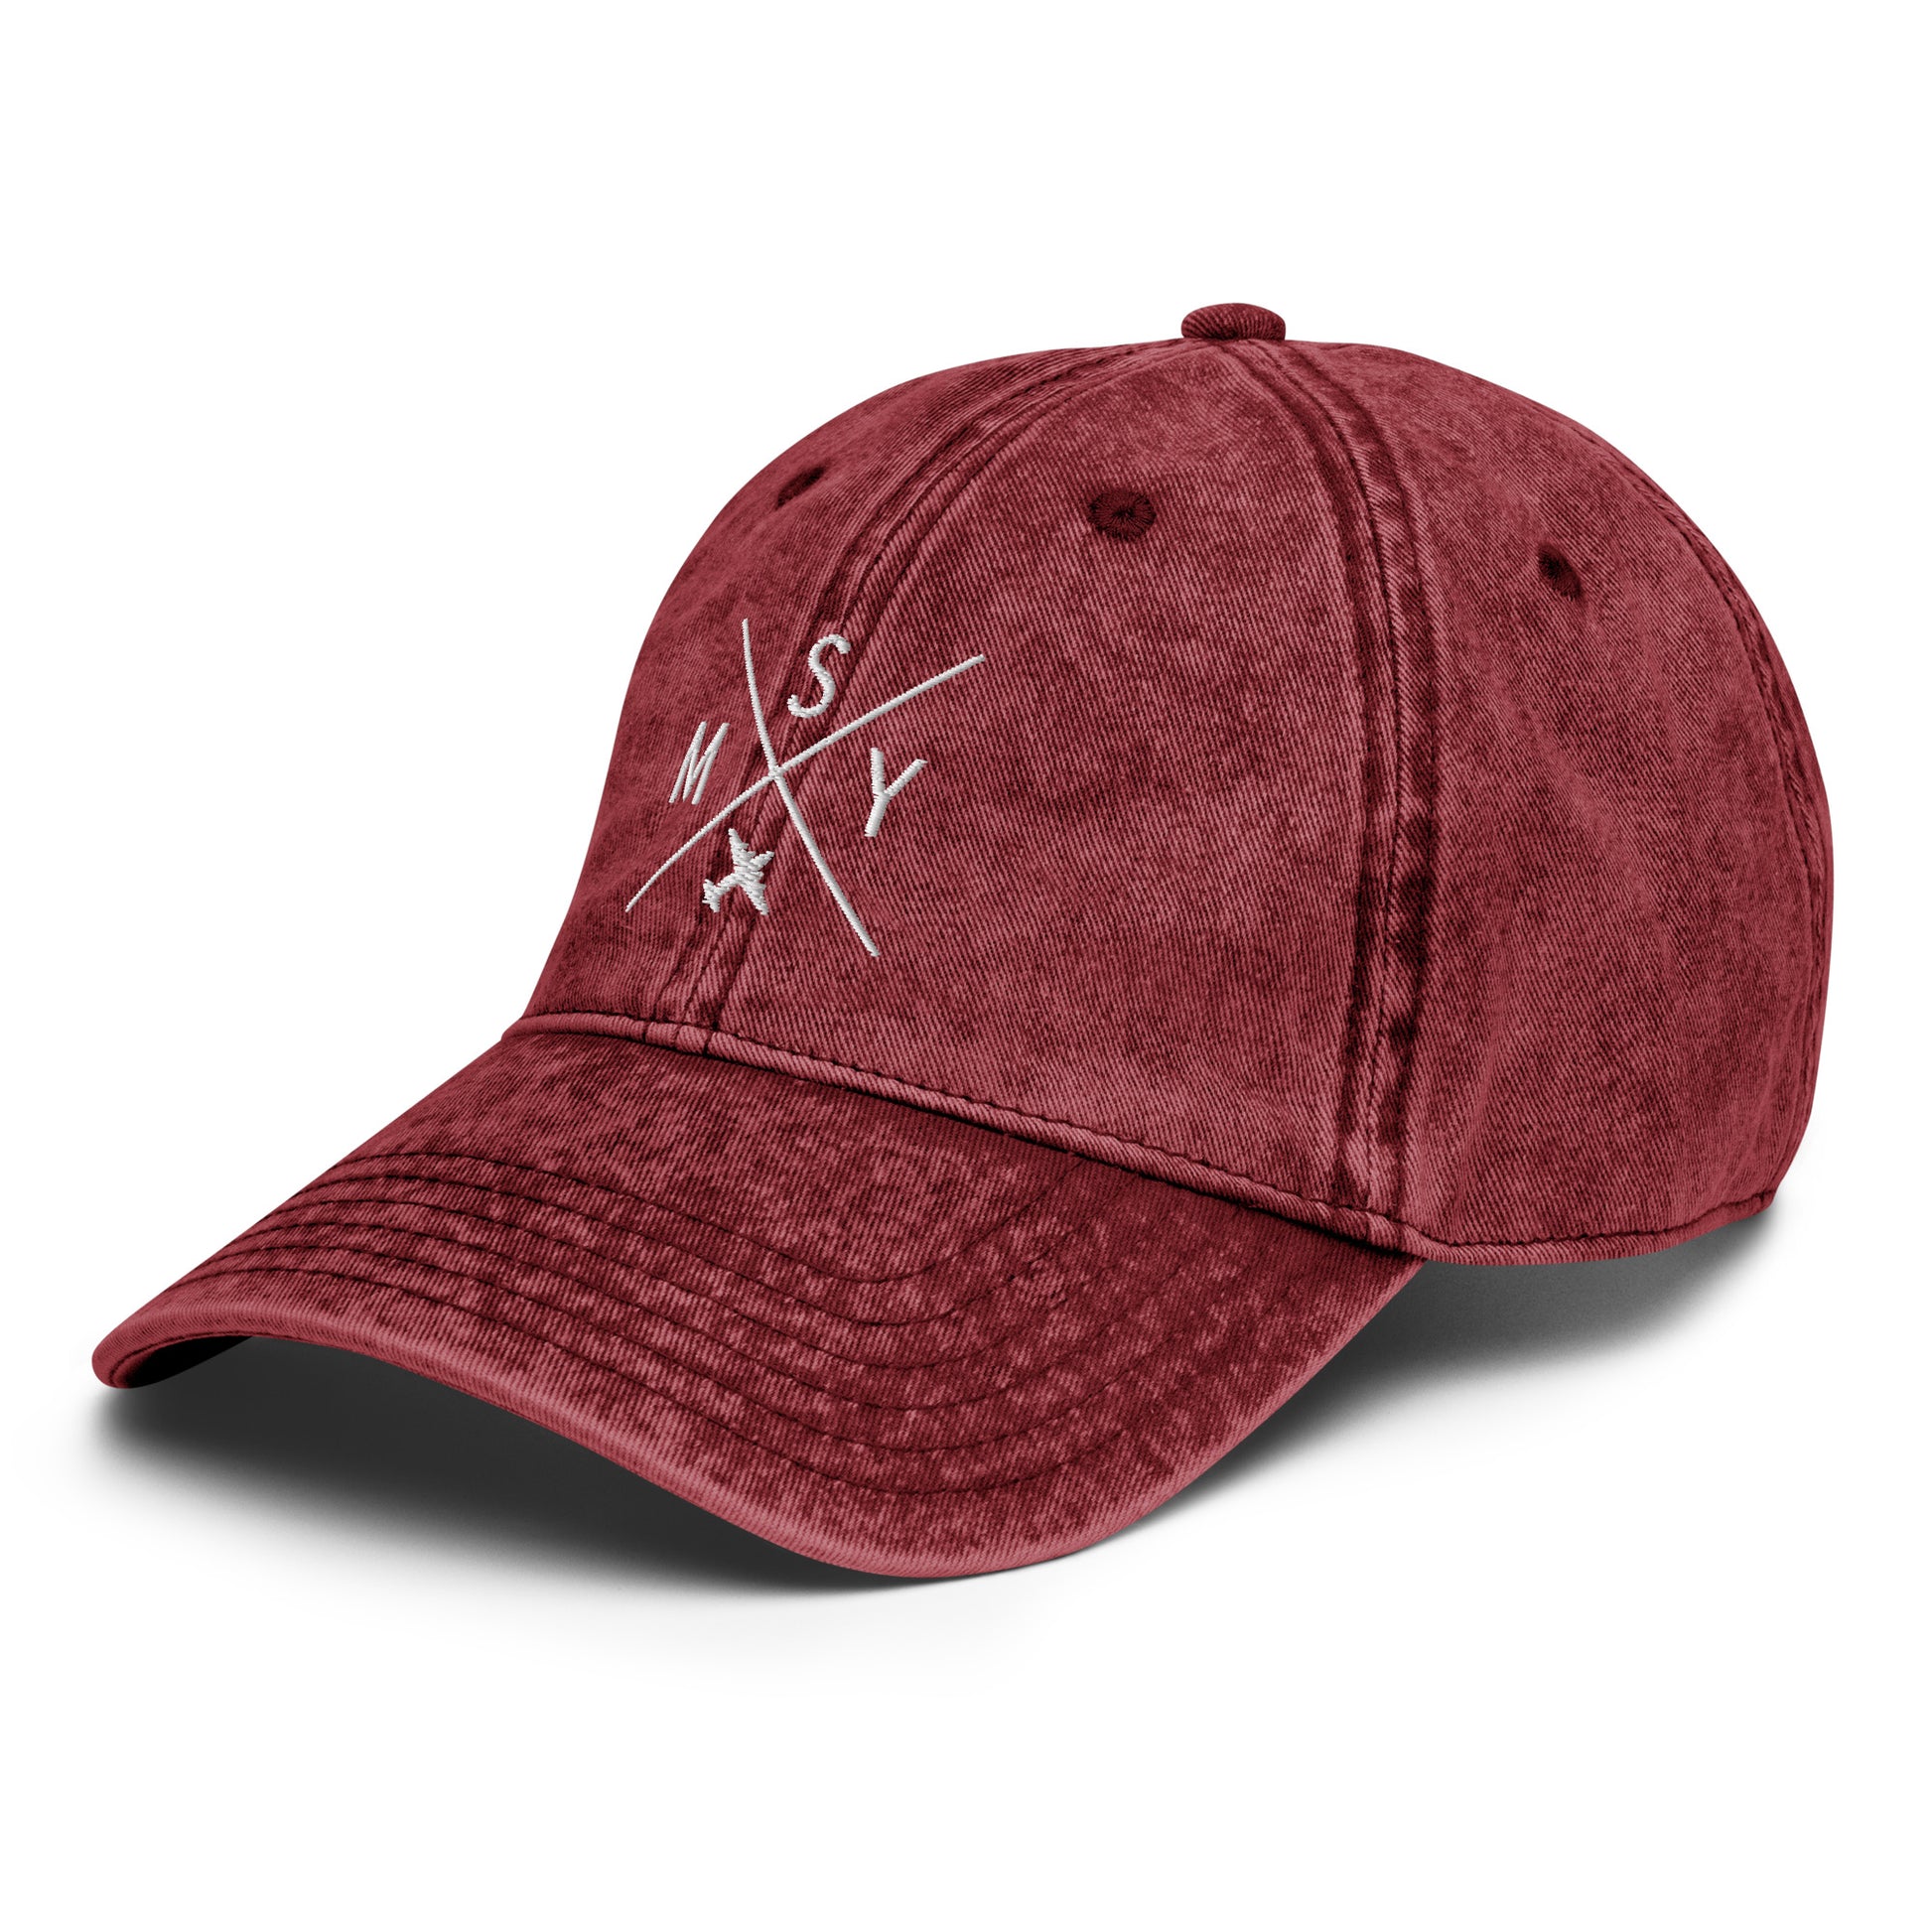 Crossed-X Cotton Twill Cap - White • MSY New Orleans • YHM Designs - Image 23